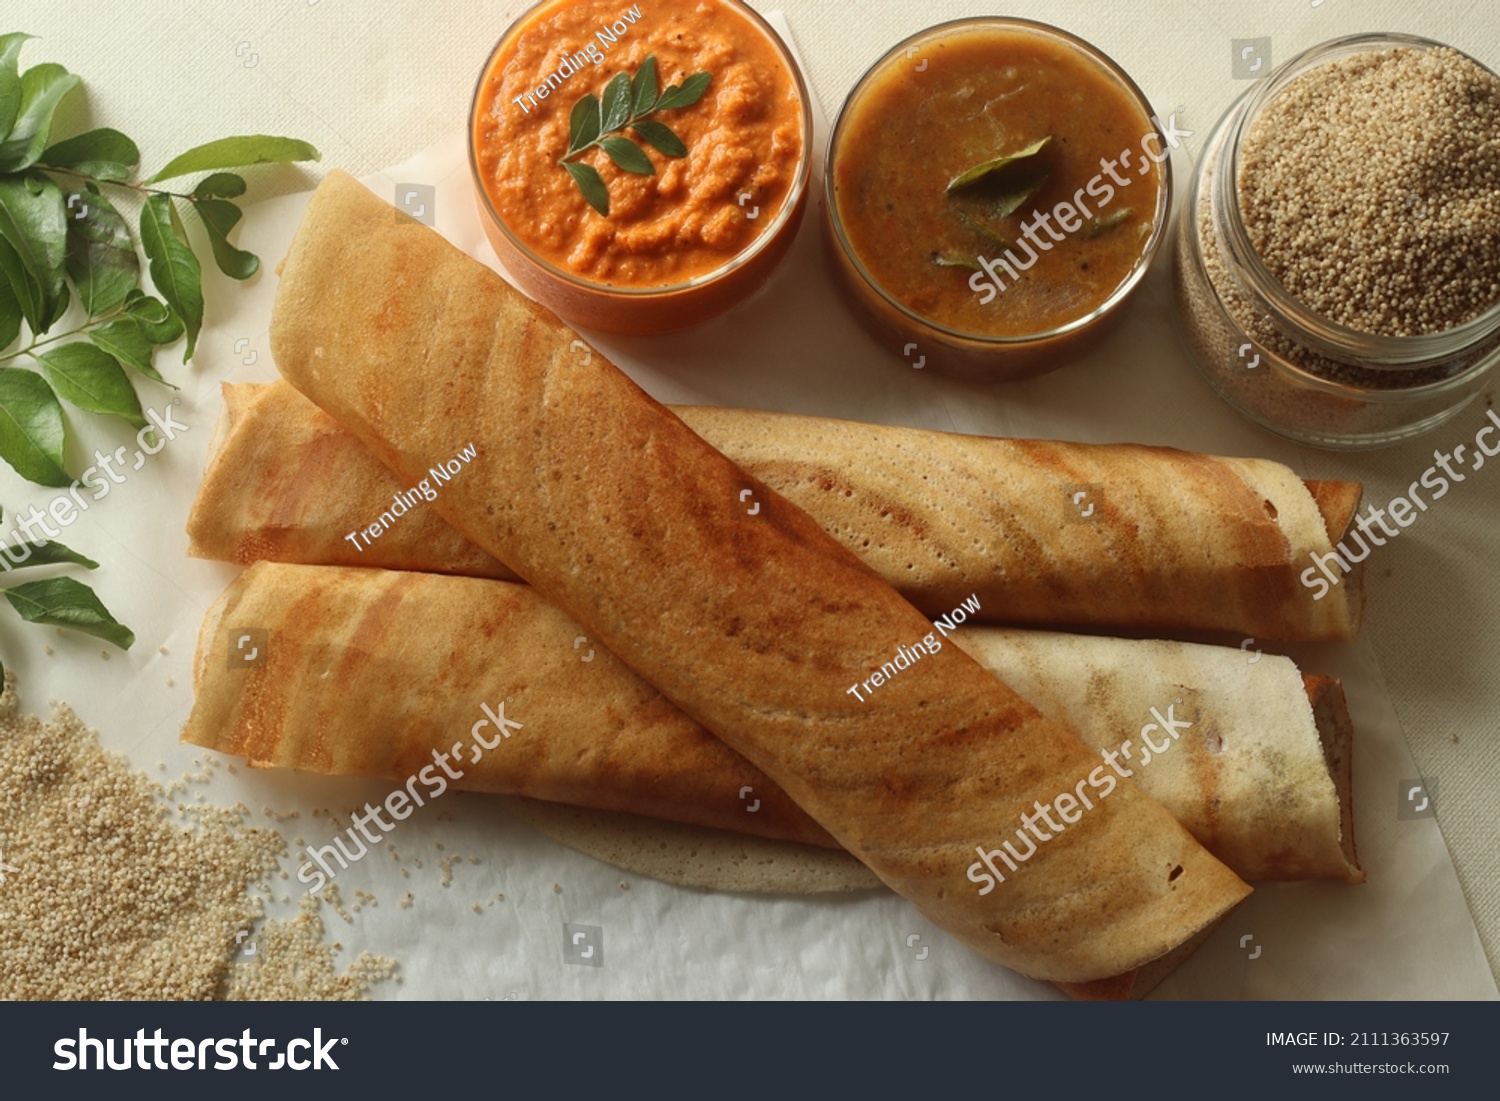 Crispy crepes made of little millets and lentils. Commonly known as little millet dosa. Plated as dosa rolls. Served with coconut spicy condiments and sambar. Shot on white background #2111363597